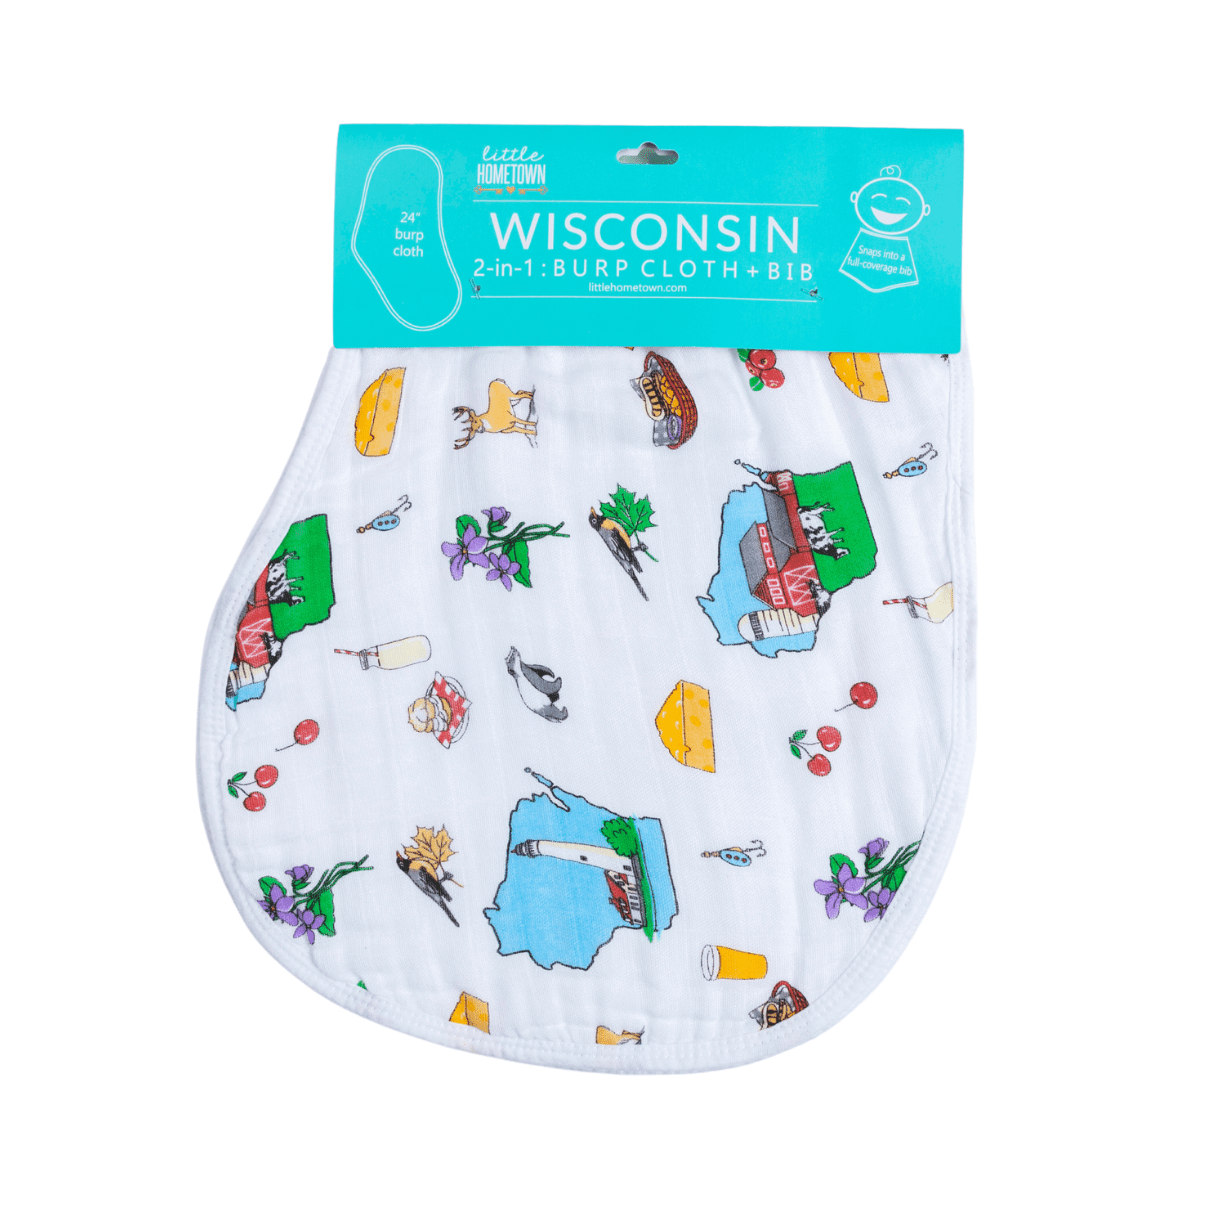 Wisconsin-themed baby burp bib, featuring state icons and Wisconsin state outline with a farm, also featuring birds, cheese, cherries, and other local iconography